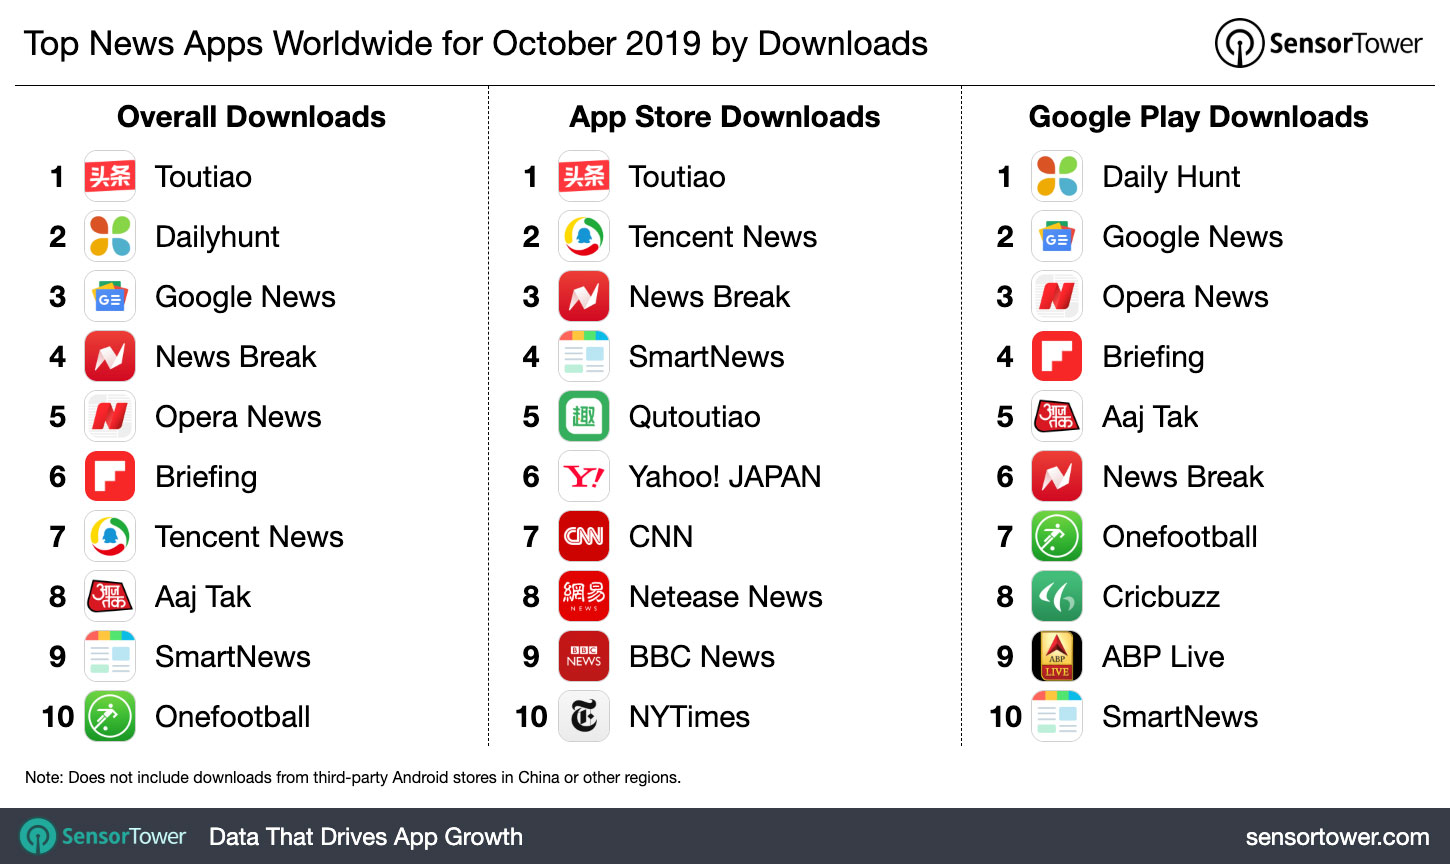 Top News Apps Worldwide for October 2019 by Downloads